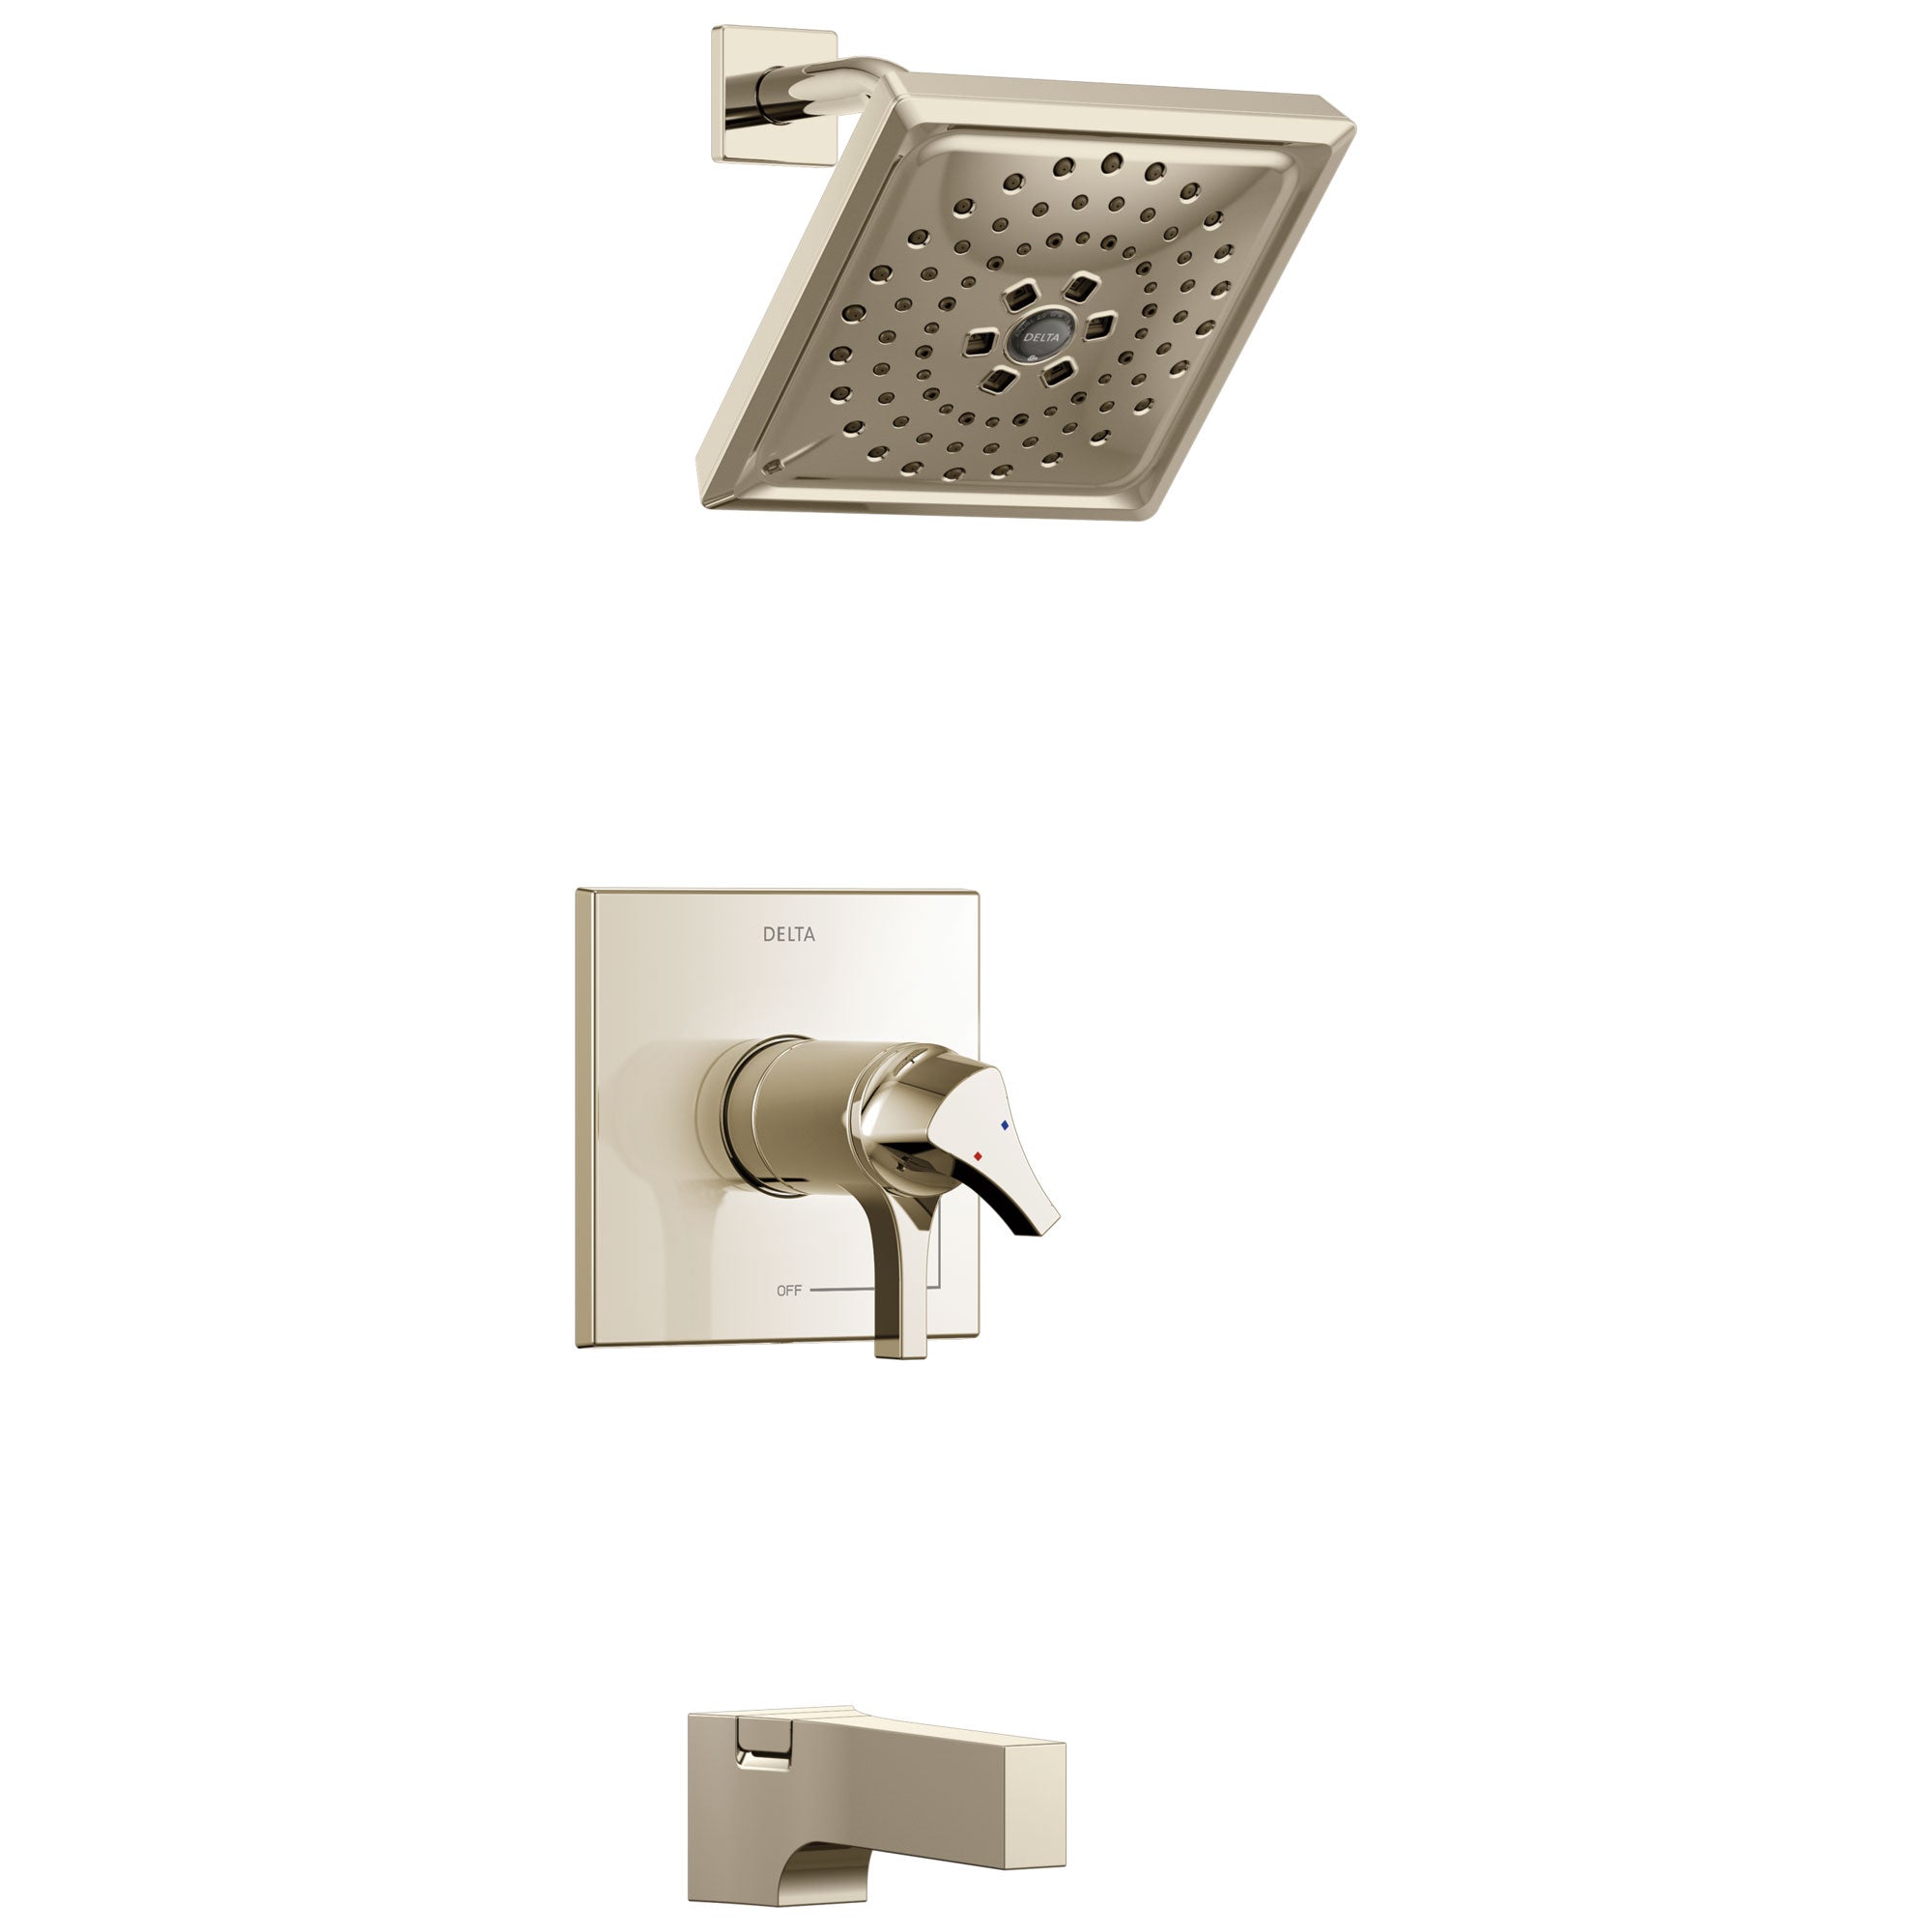 Delta Zura Collection Polished Nickel Modern Thermostatic TempAssure 17T Series Tub and Shower Combination Faucet Trim Kit (Requires Valve) DT17T474PN